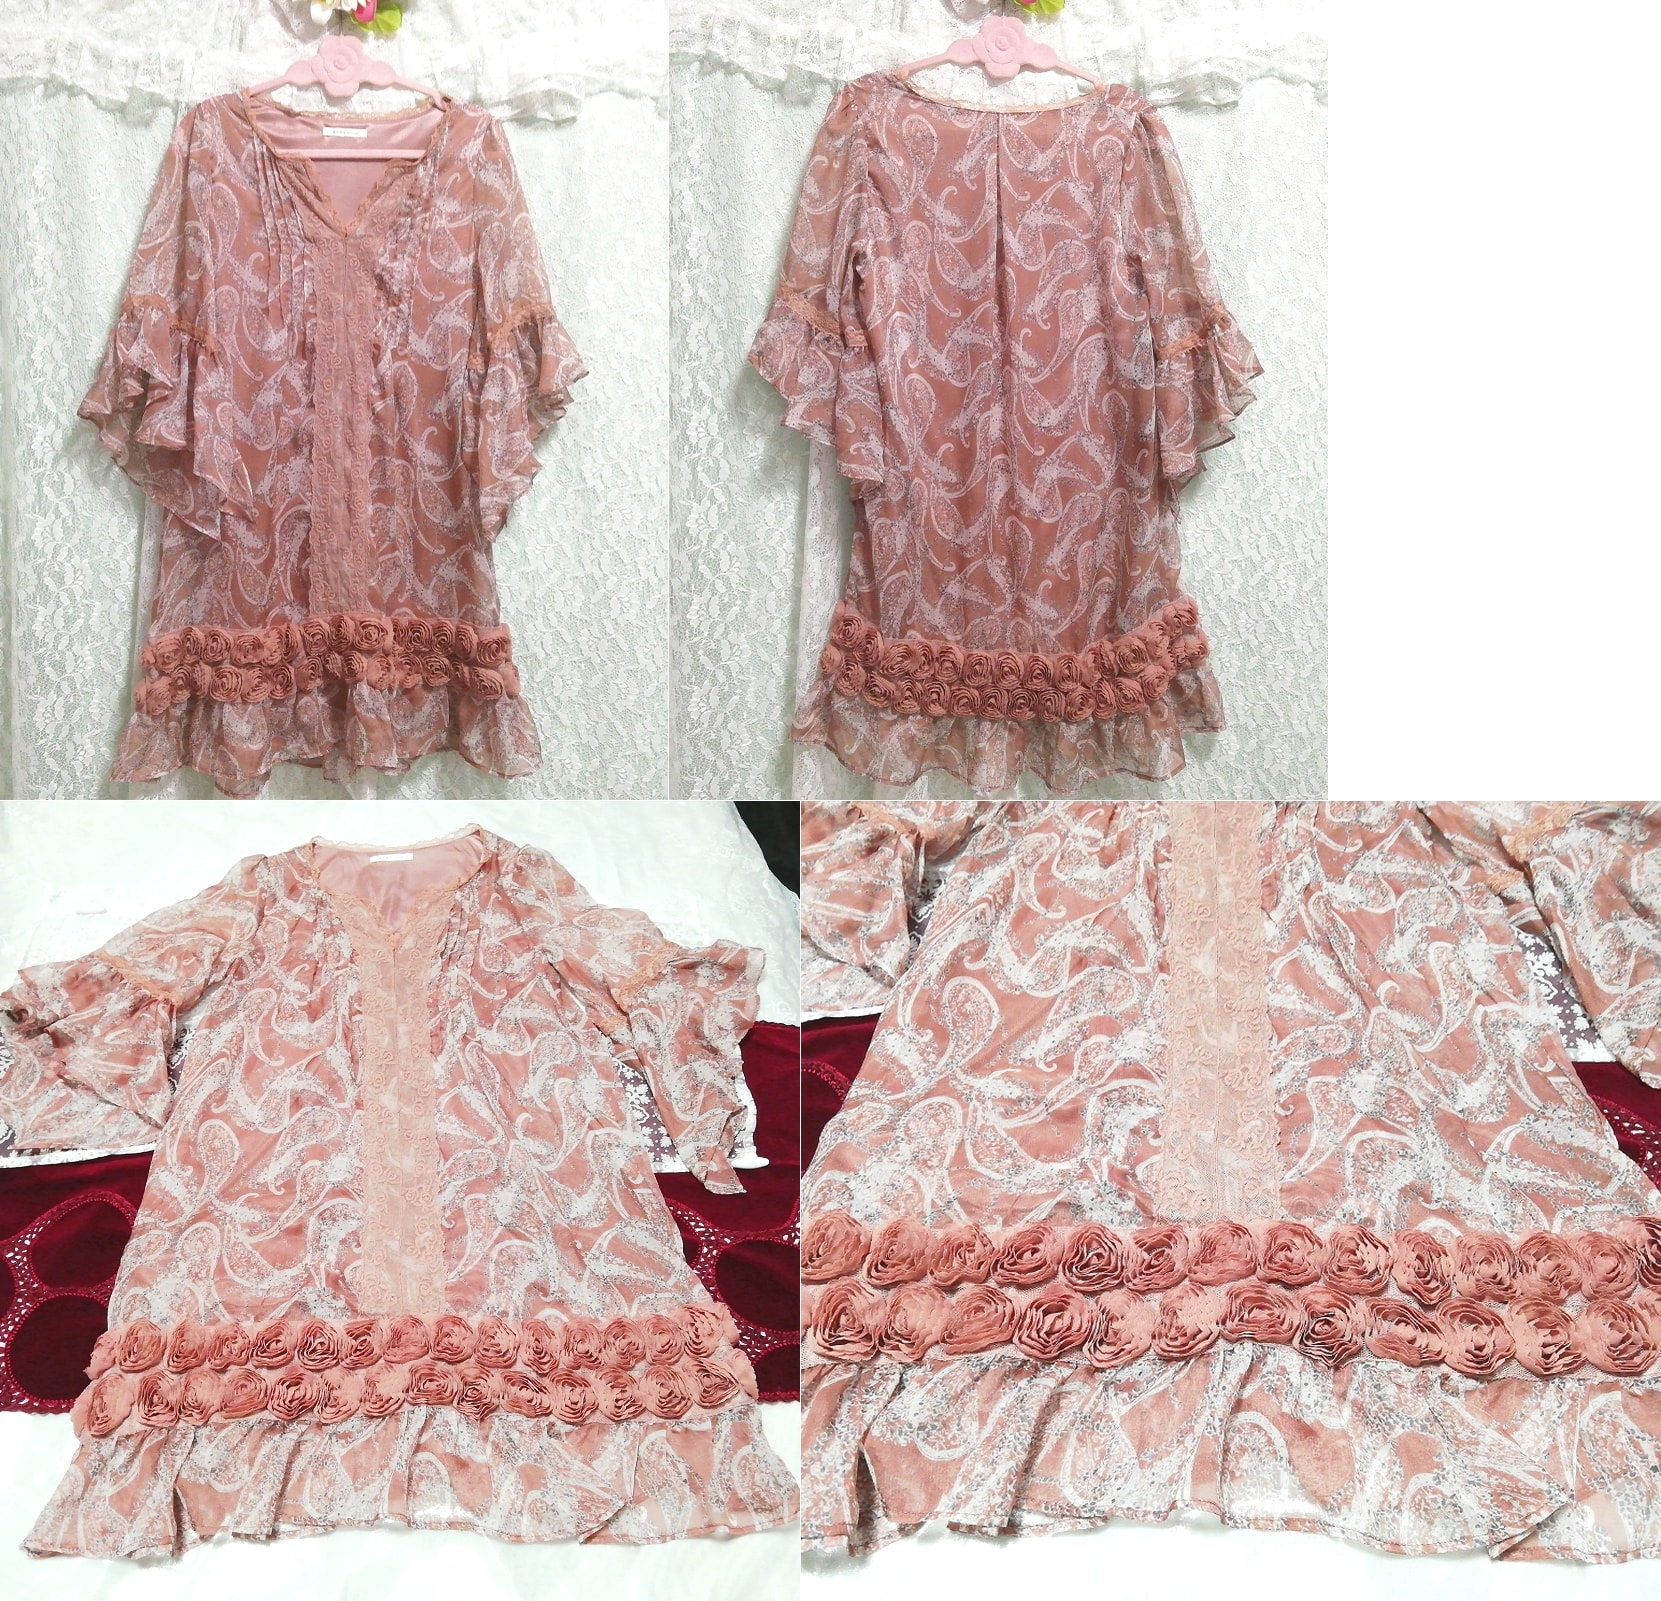 Cocoa color rose print chiffon negligee nightgown tunic, knee length skirt, m size